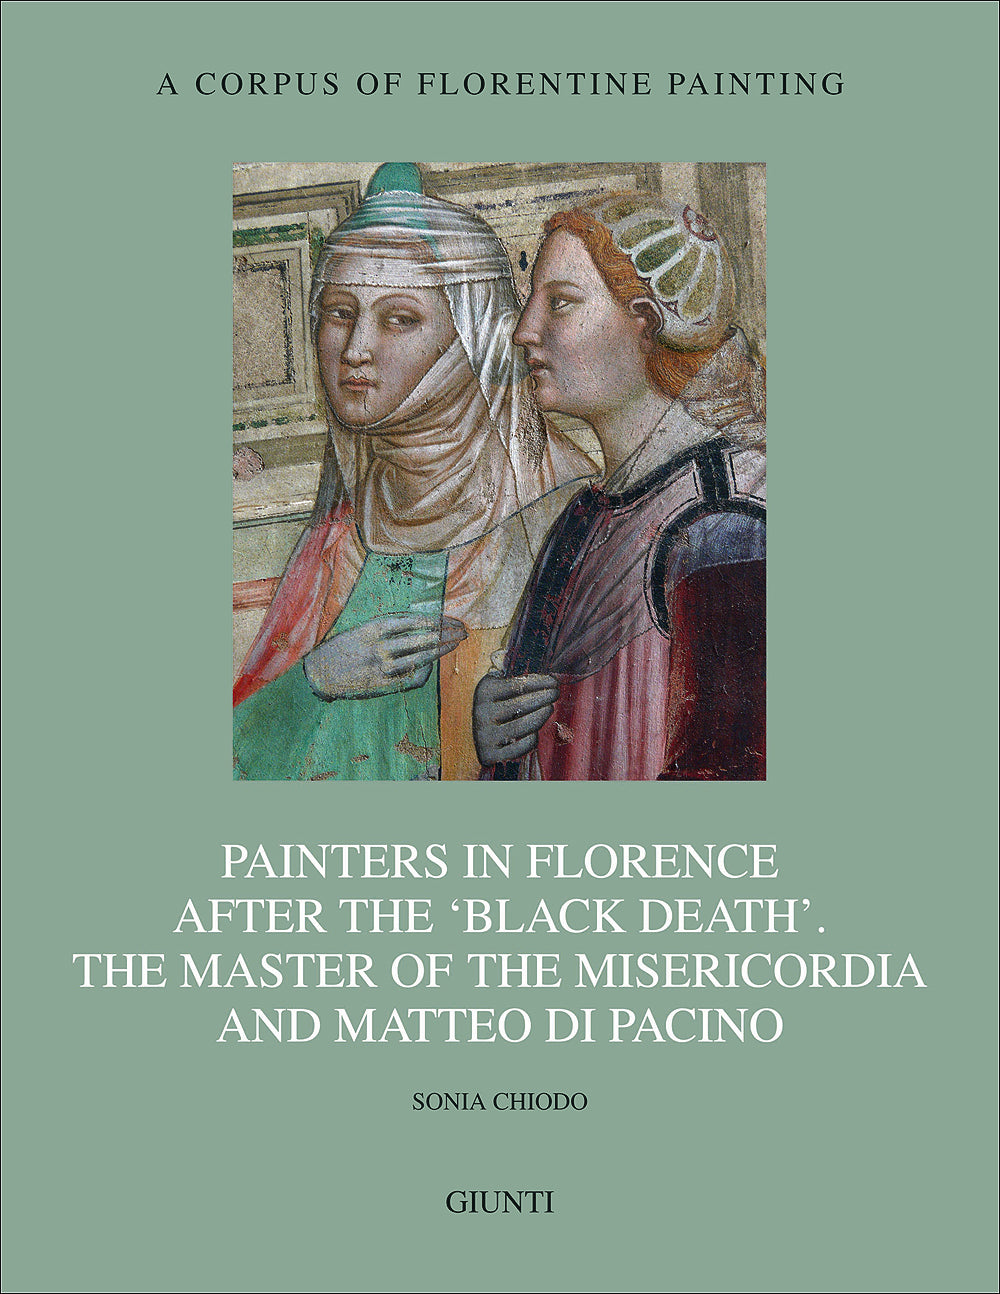 Painters in Florence after the 'black death'. The Master of the Misericordia and Matteo di Pacino::Section IV, volume IX